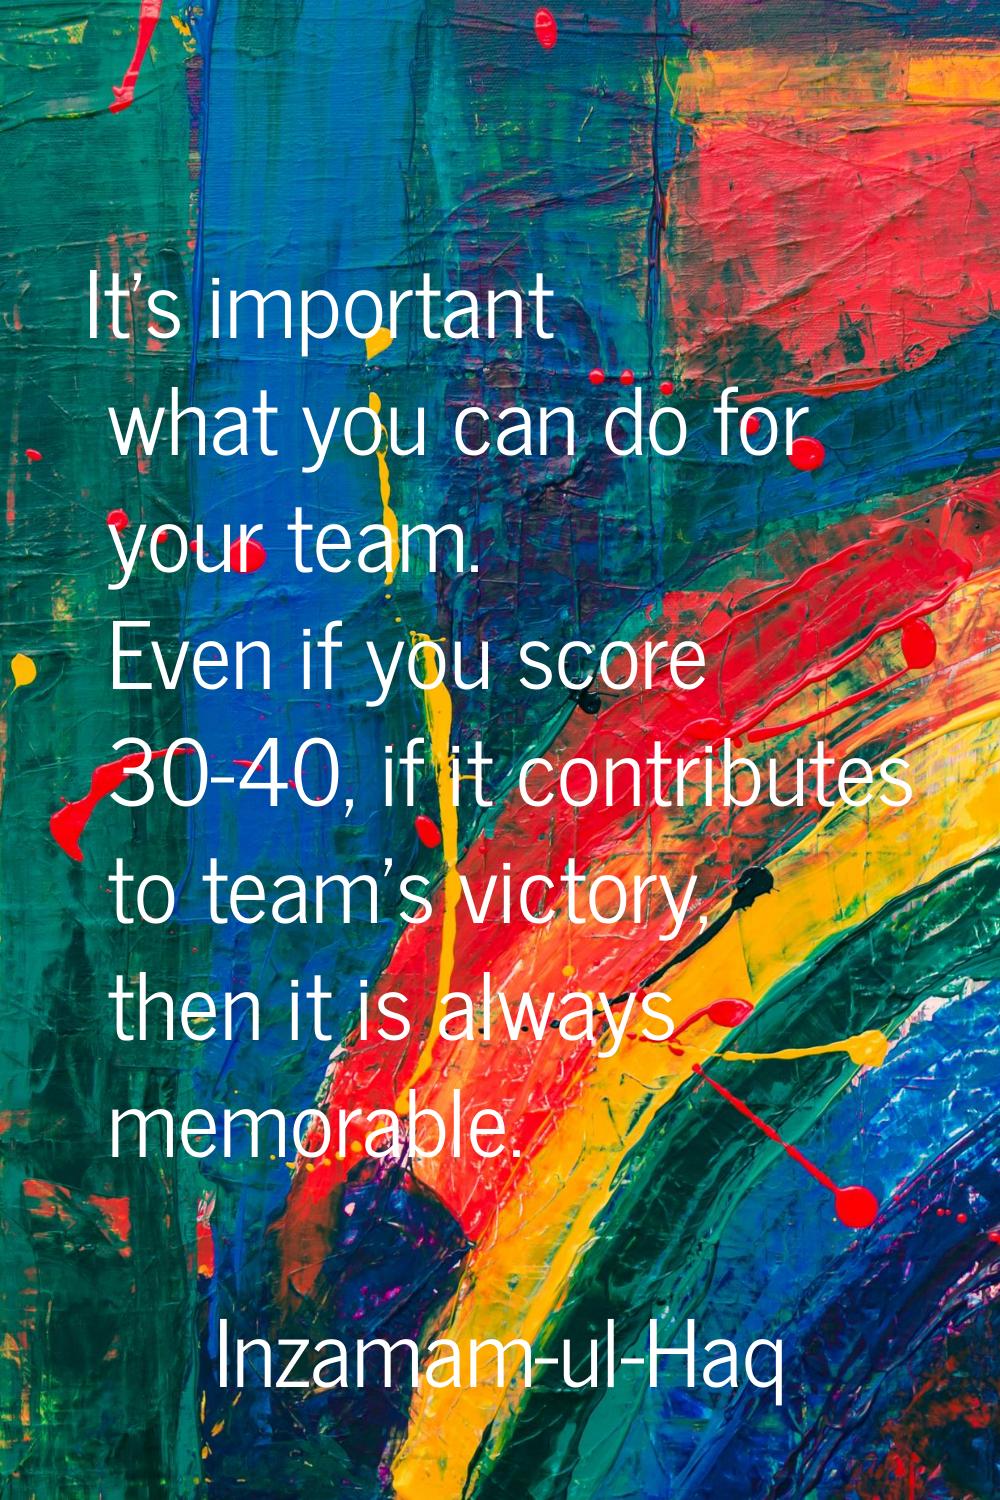 It's important what you can do for your team. Even if you score 30-40, if it contributes to team's 